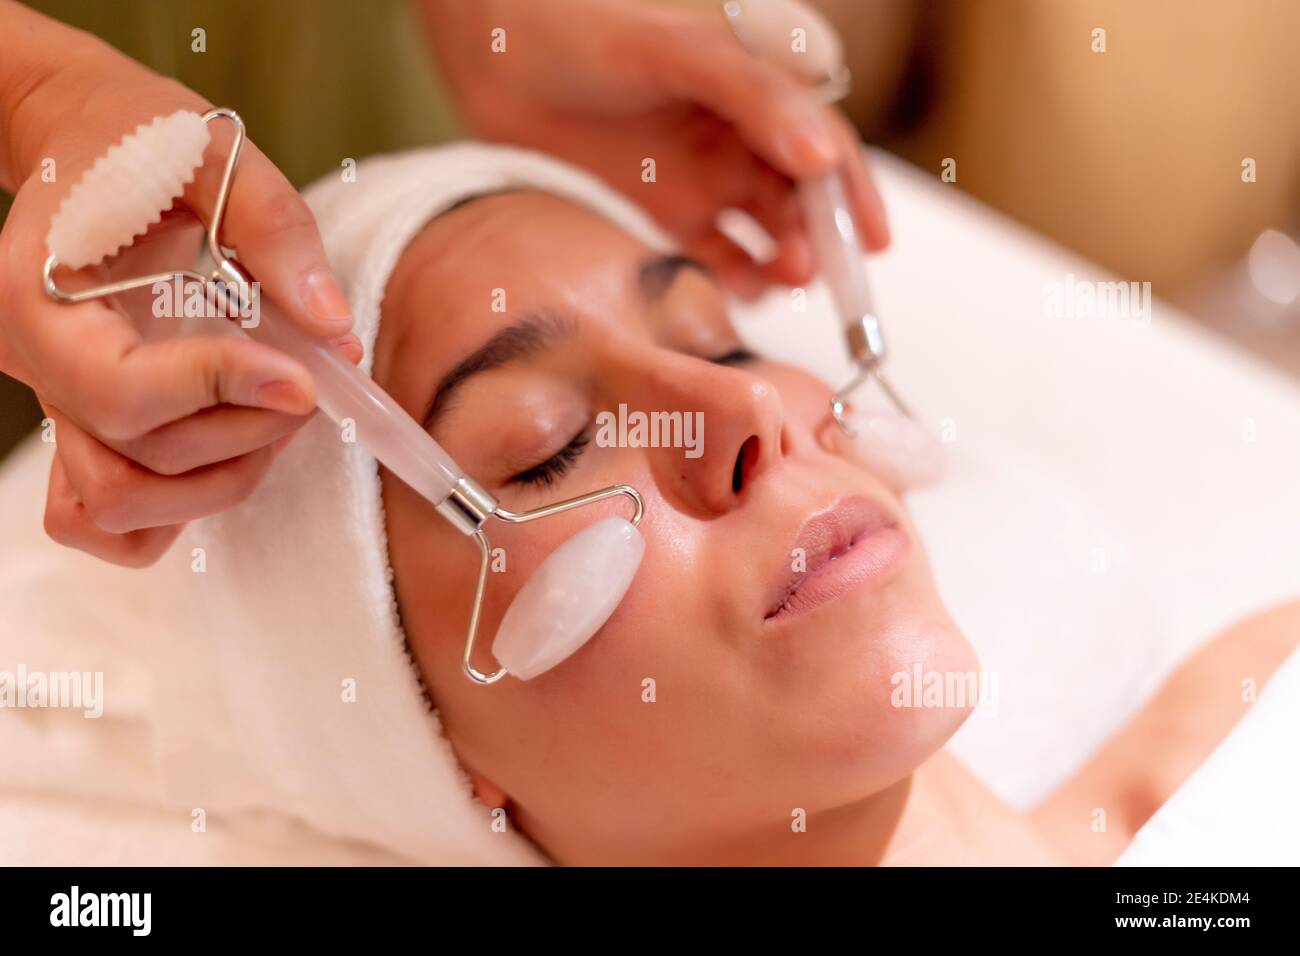 Young female customer receiving facial massage during treatment from beautician at spa Stock Photo